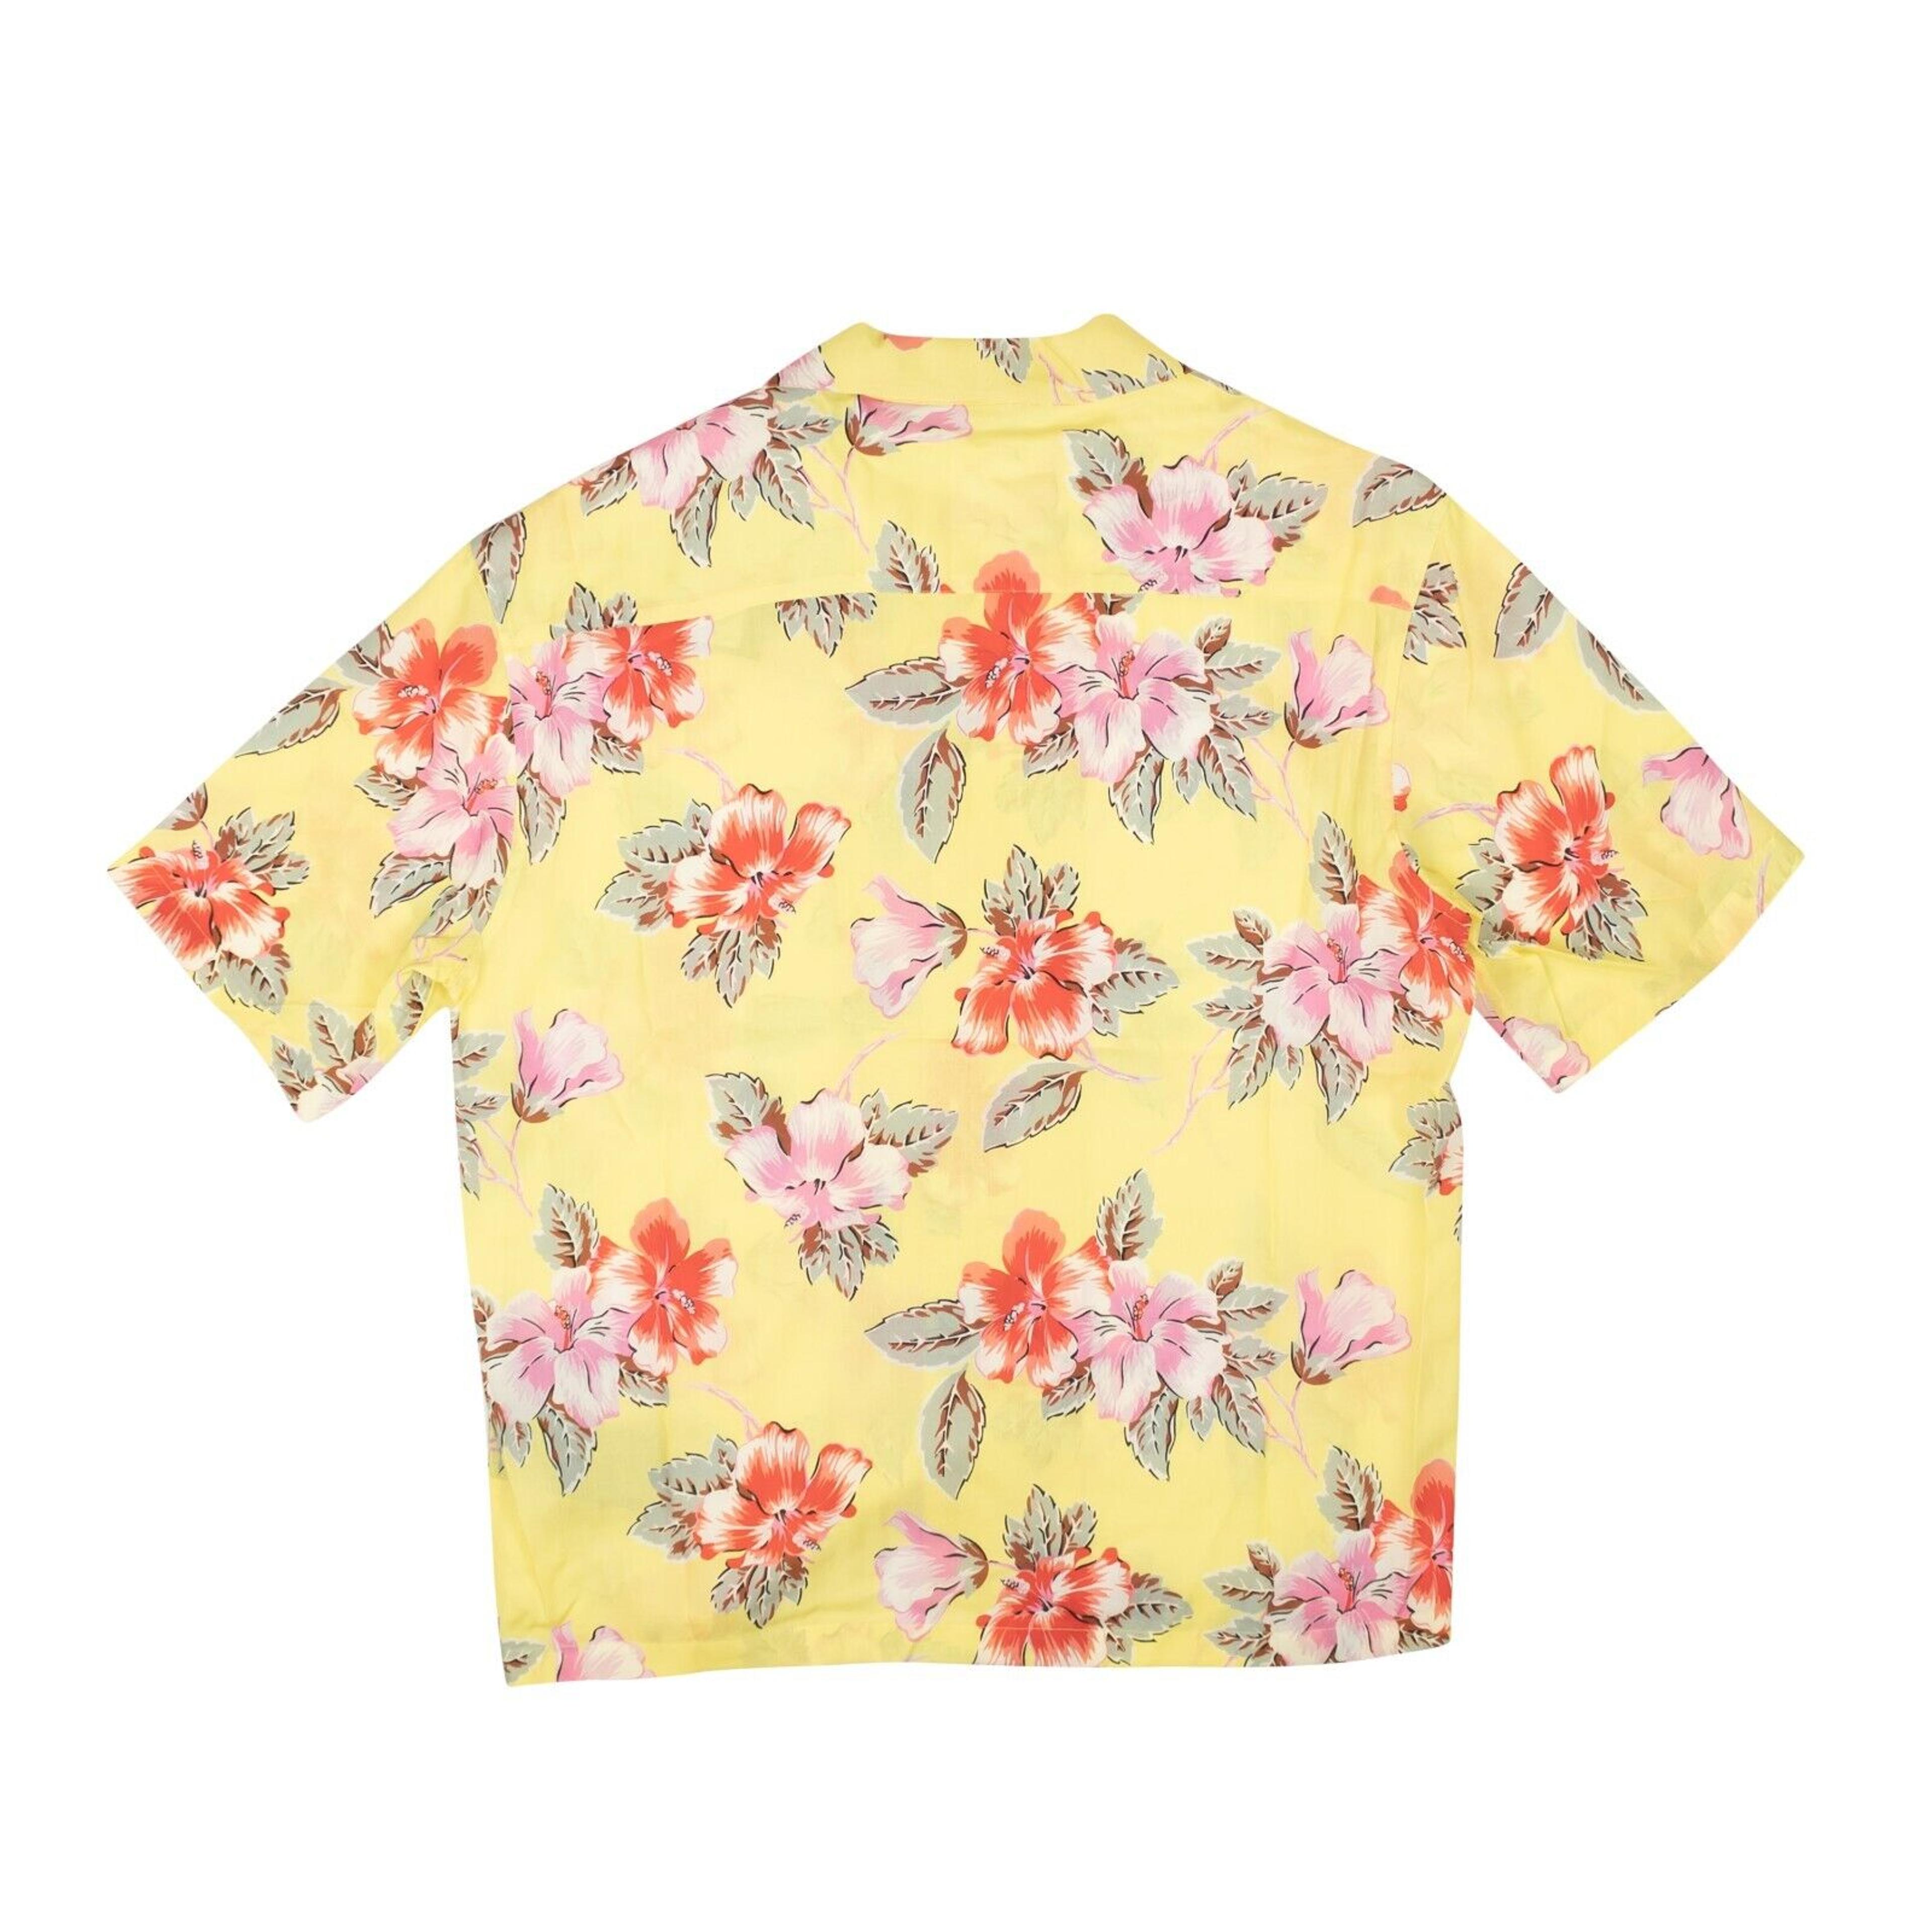 Alternate View 3 of Yellow Hibiscus Print Button Down Bowling Shirt